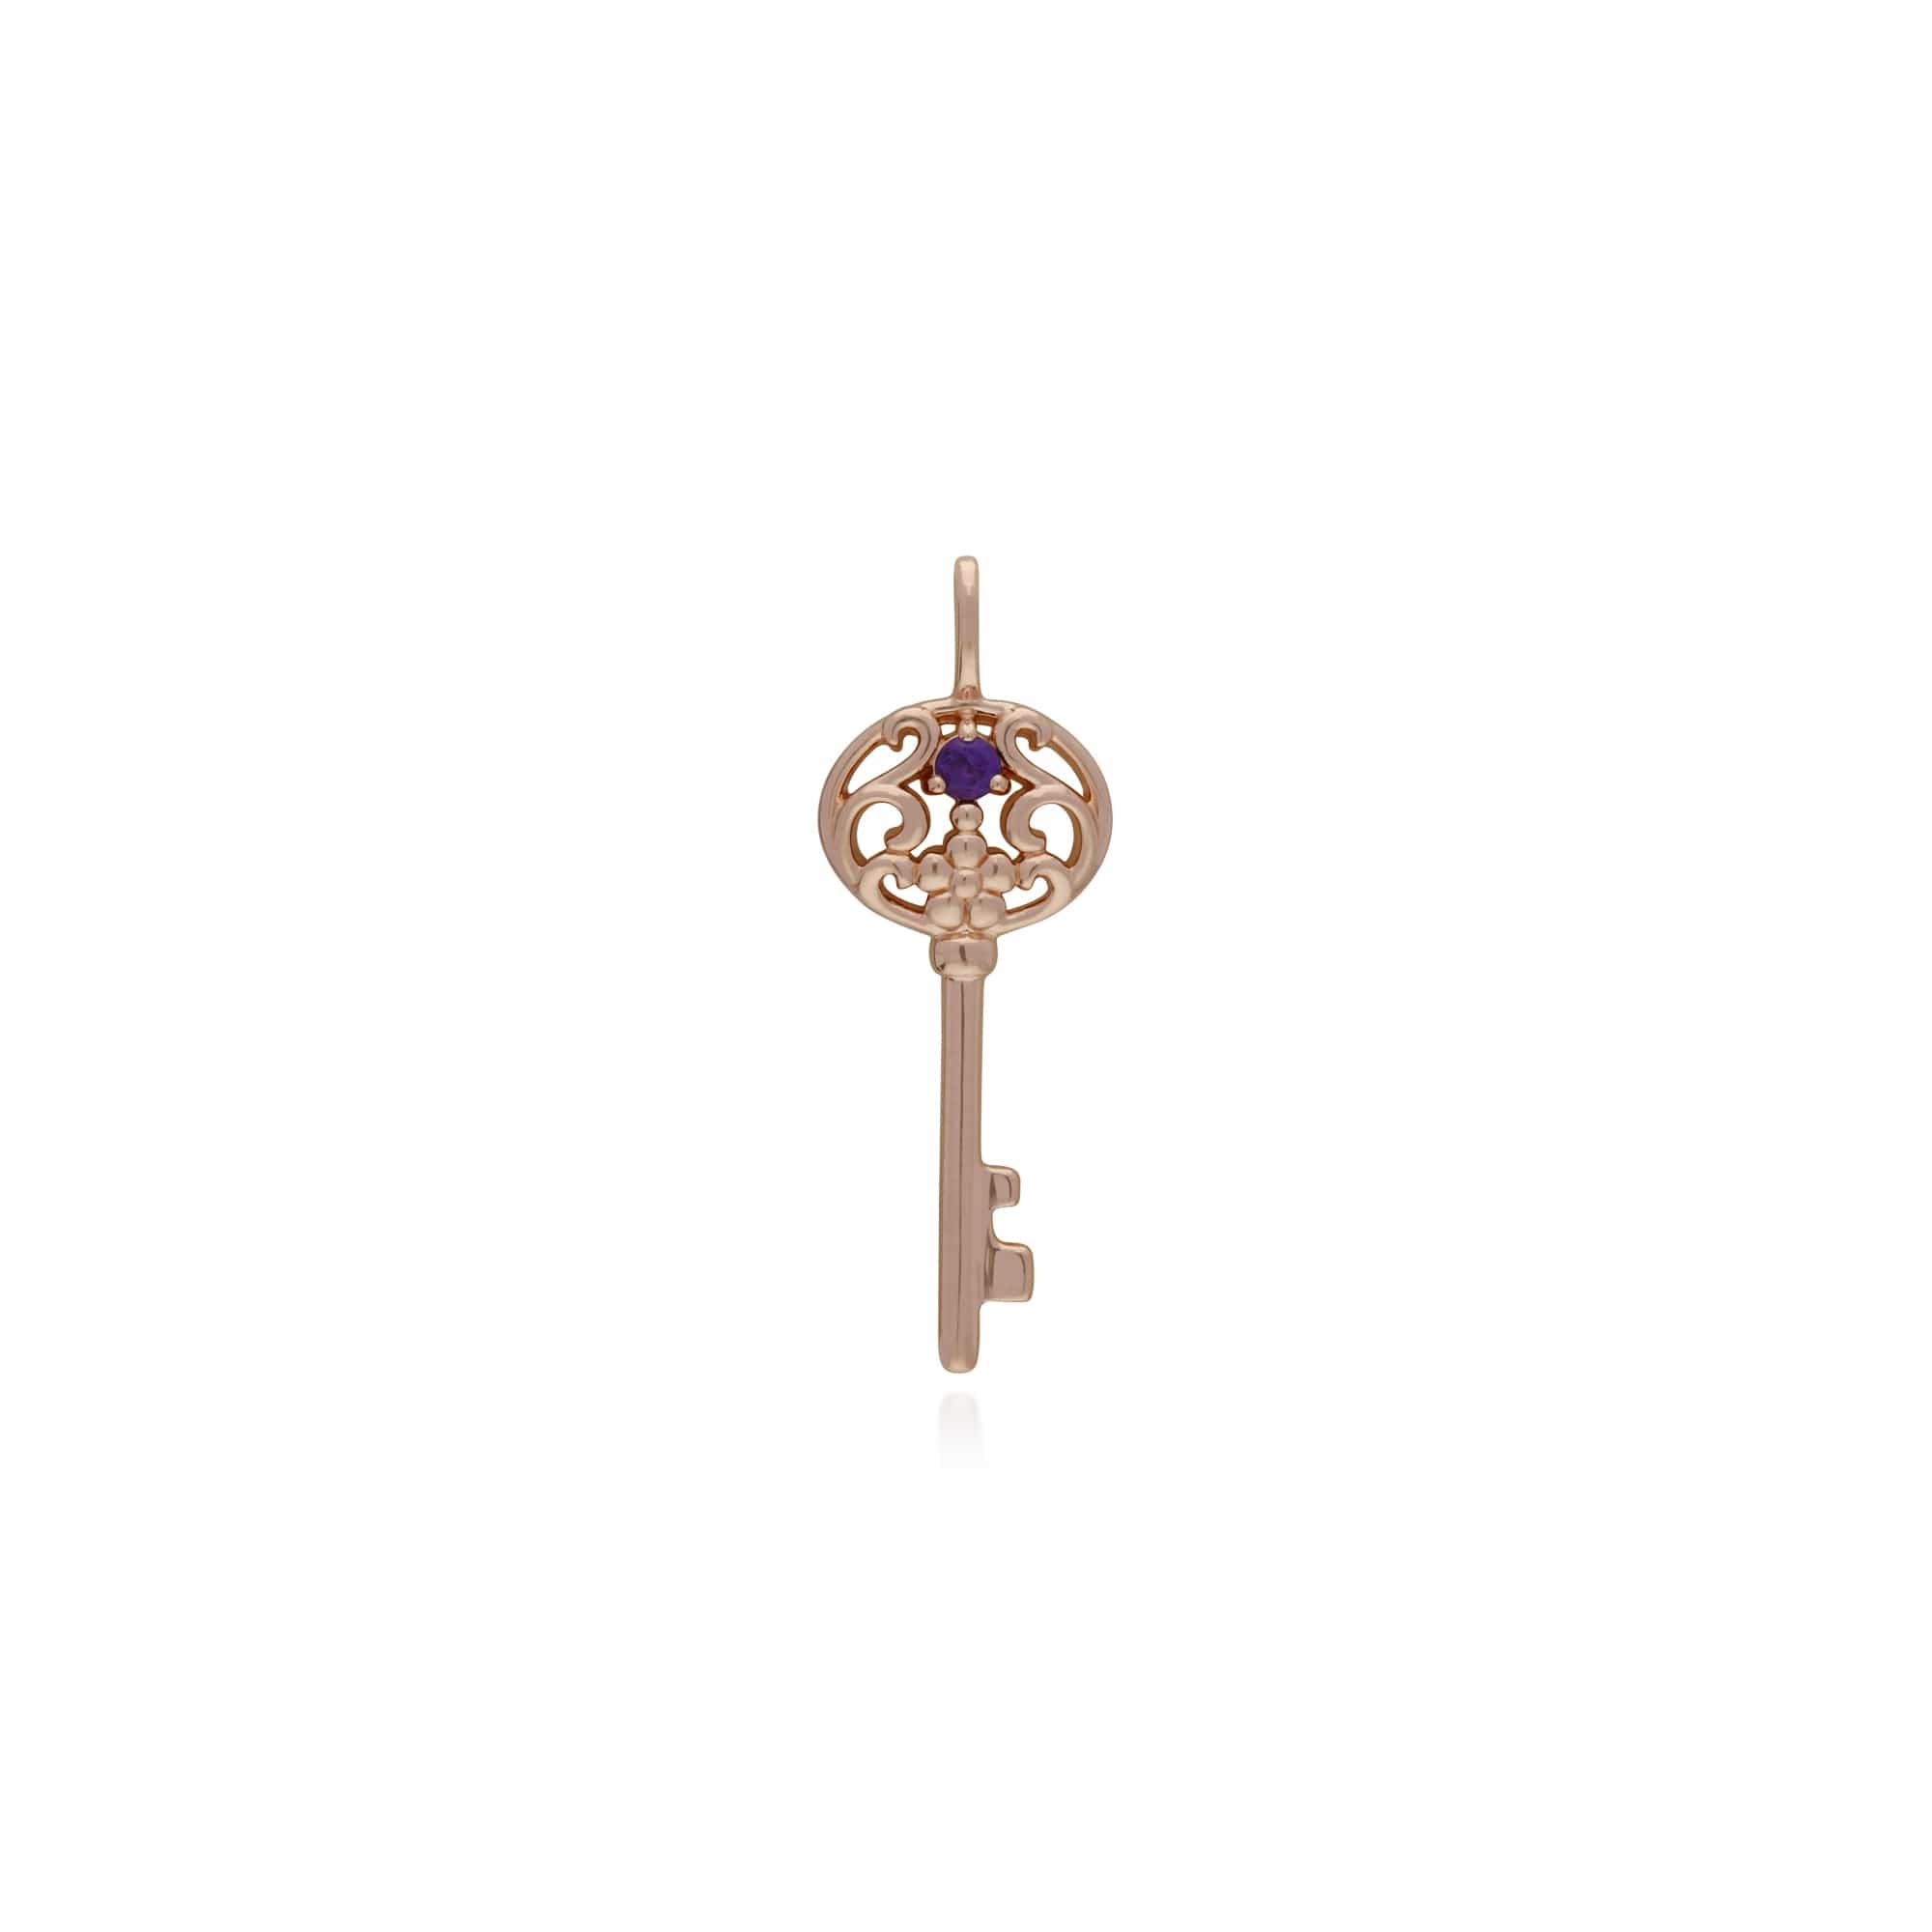 270P026705925-270P026501925 Classic Swirl Heart Lock Pendant & Amethyst Big Key Charm in Rose Gold Plated 925 Sterling Silver 2